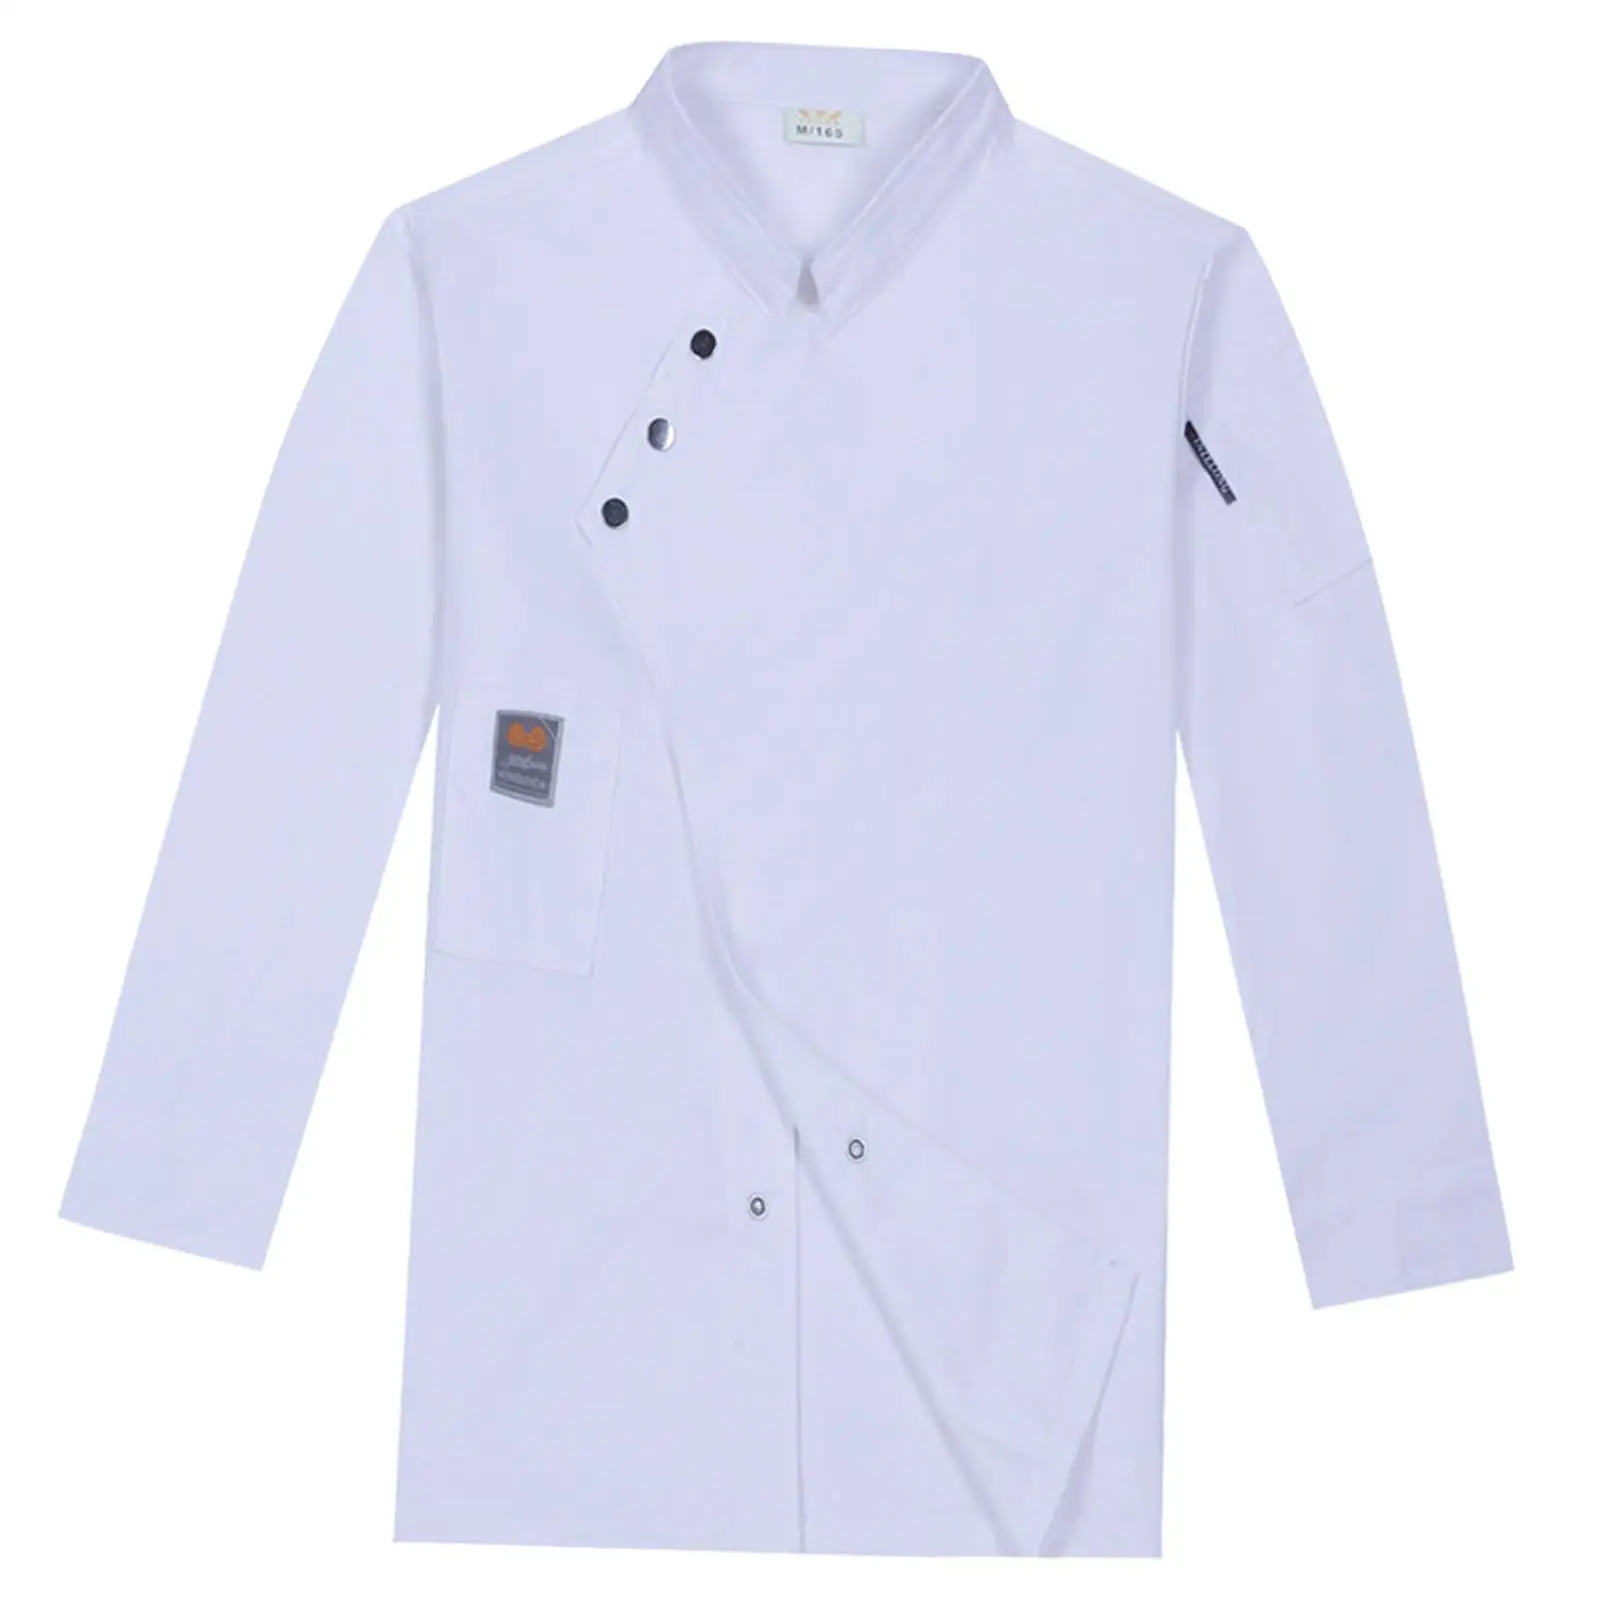 Chef Coat Long Sleeve Breathable with Pocket Lightweight Chef Clothing Button